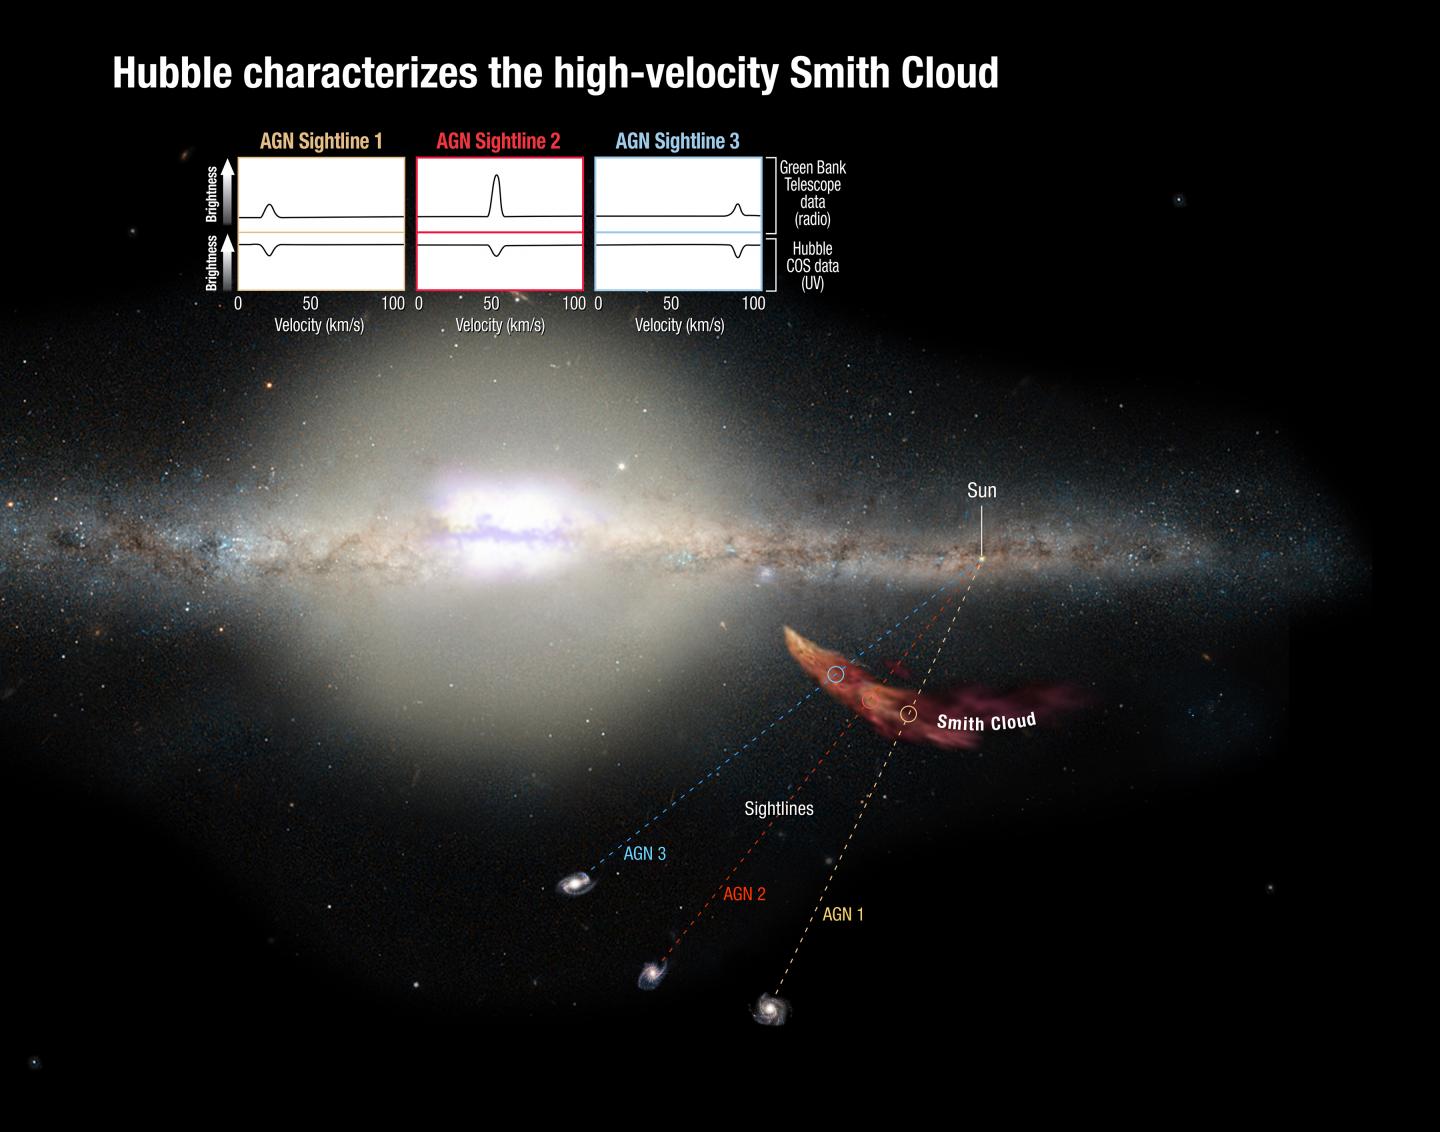 Hubble Characterizes the High-Velocity Smith Cloud